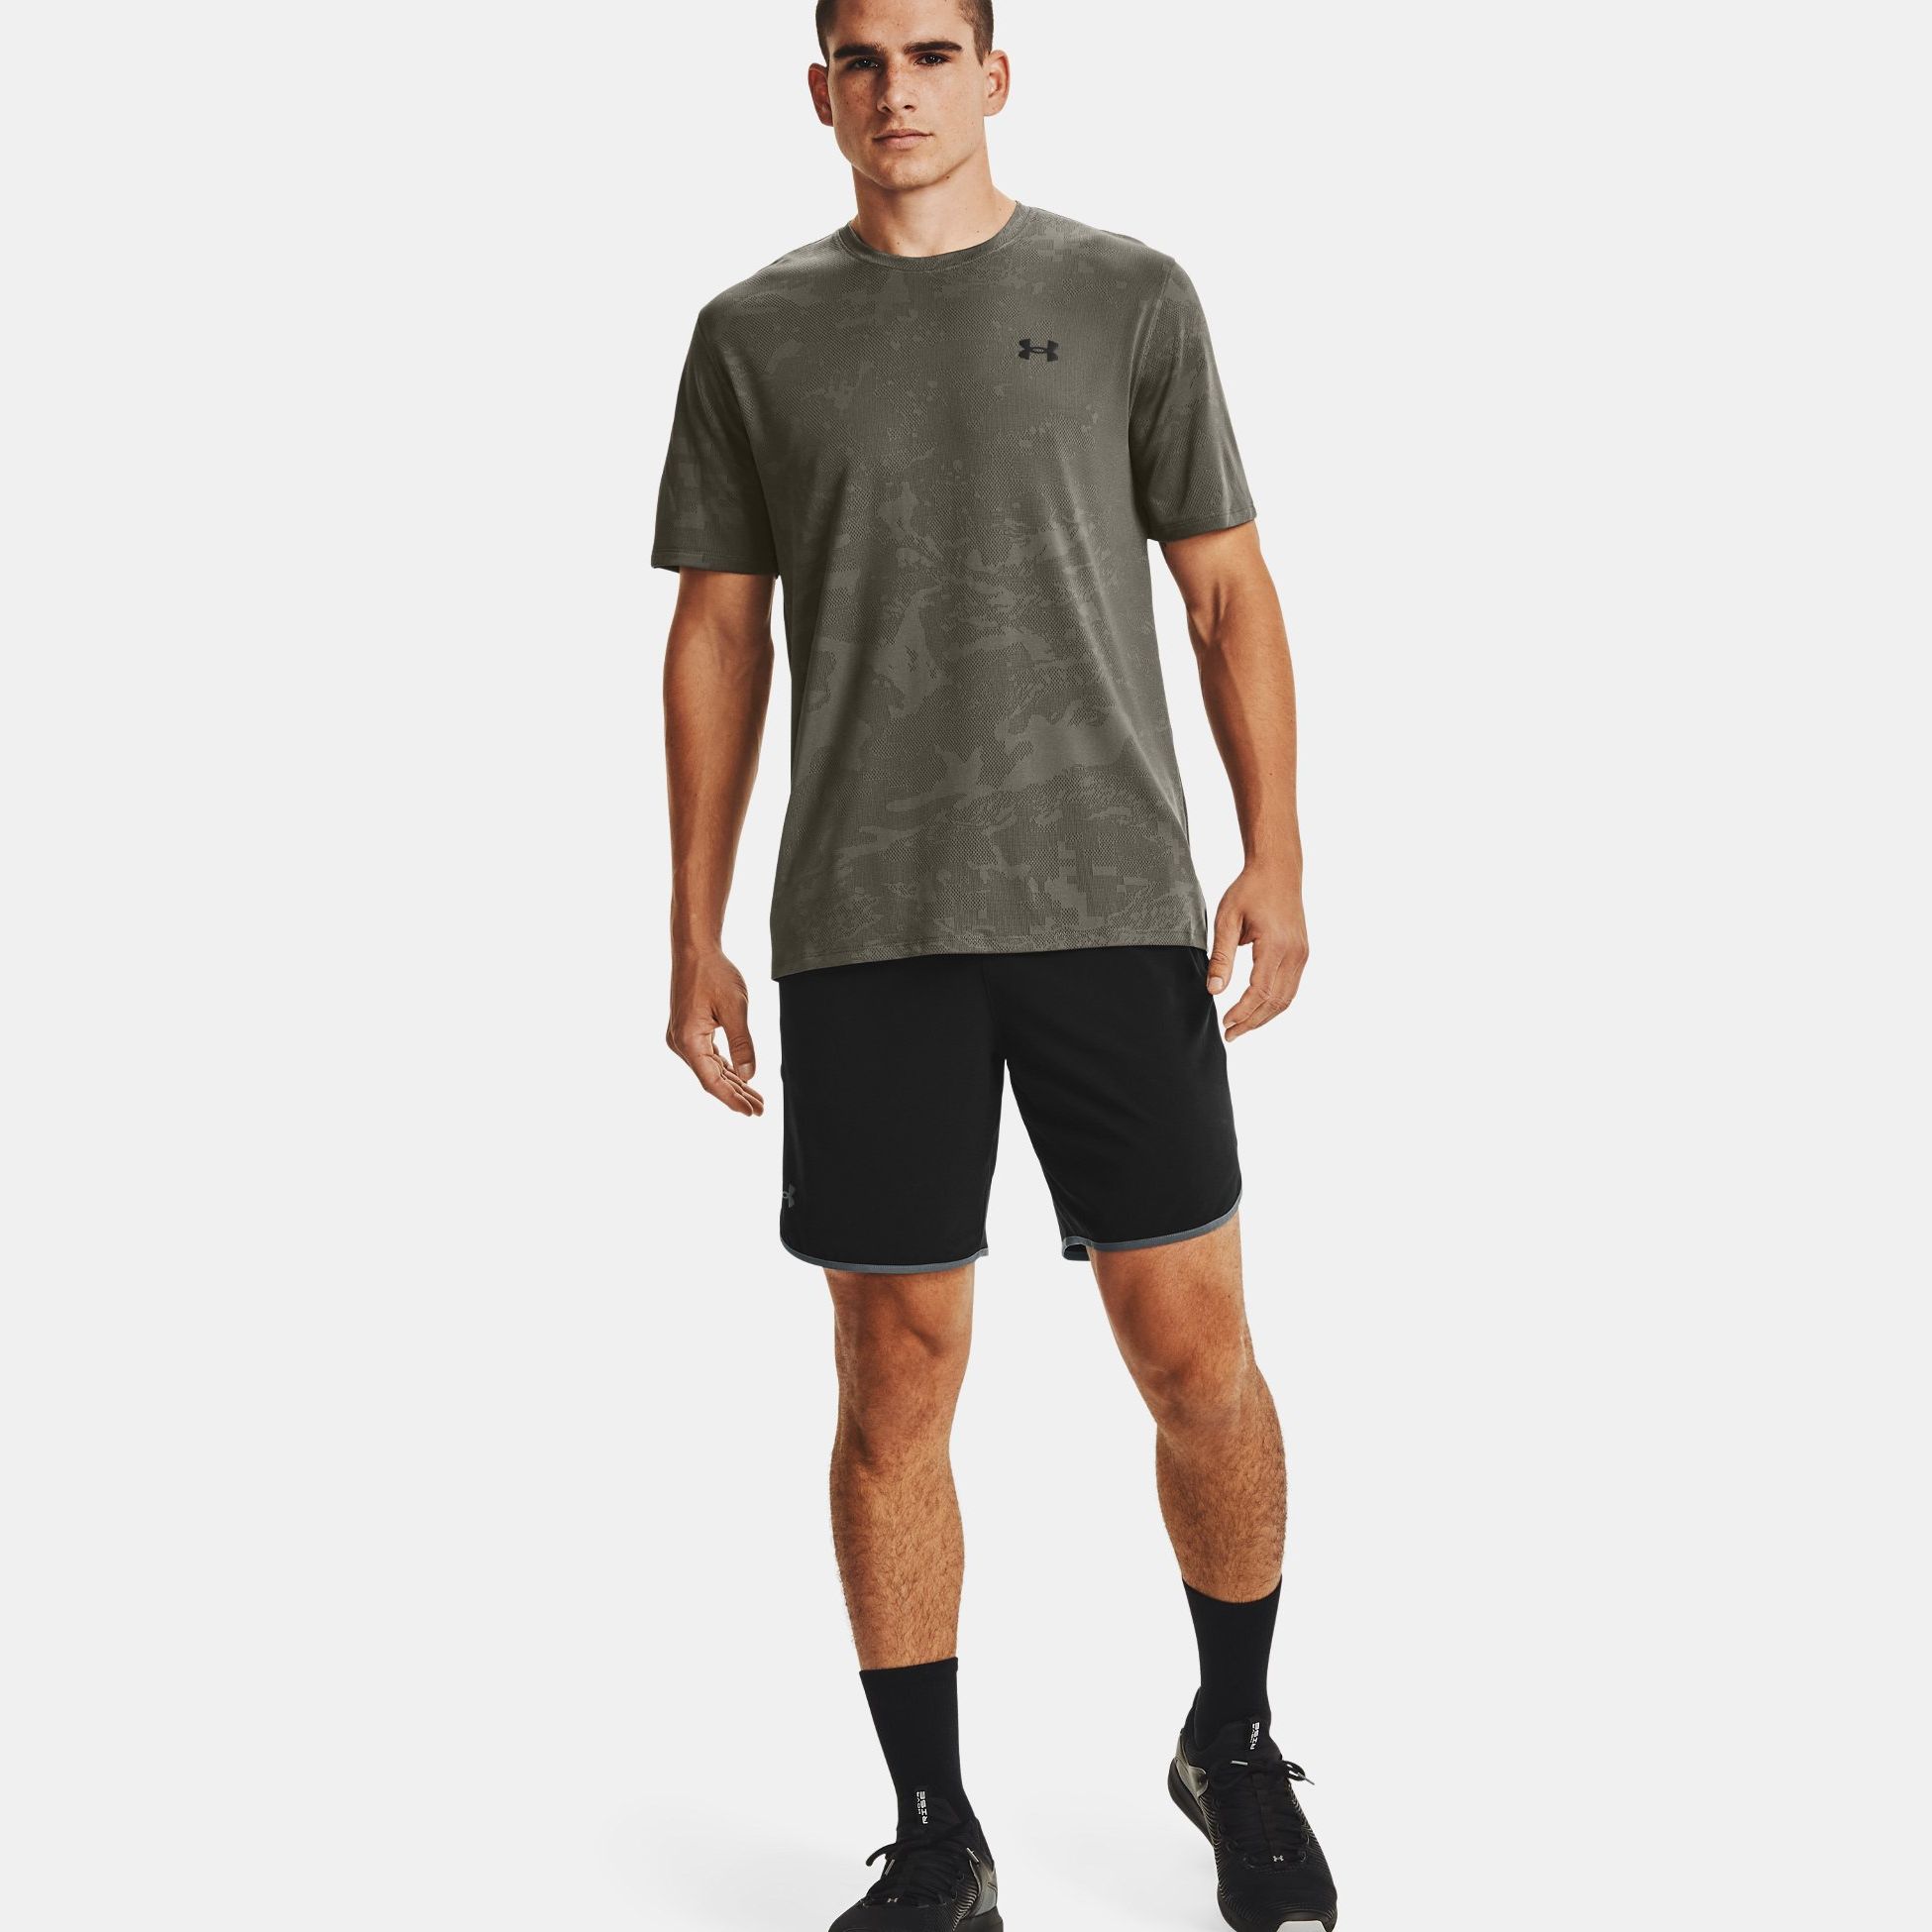 Shorts -  under armour HIIT Woven Shorts